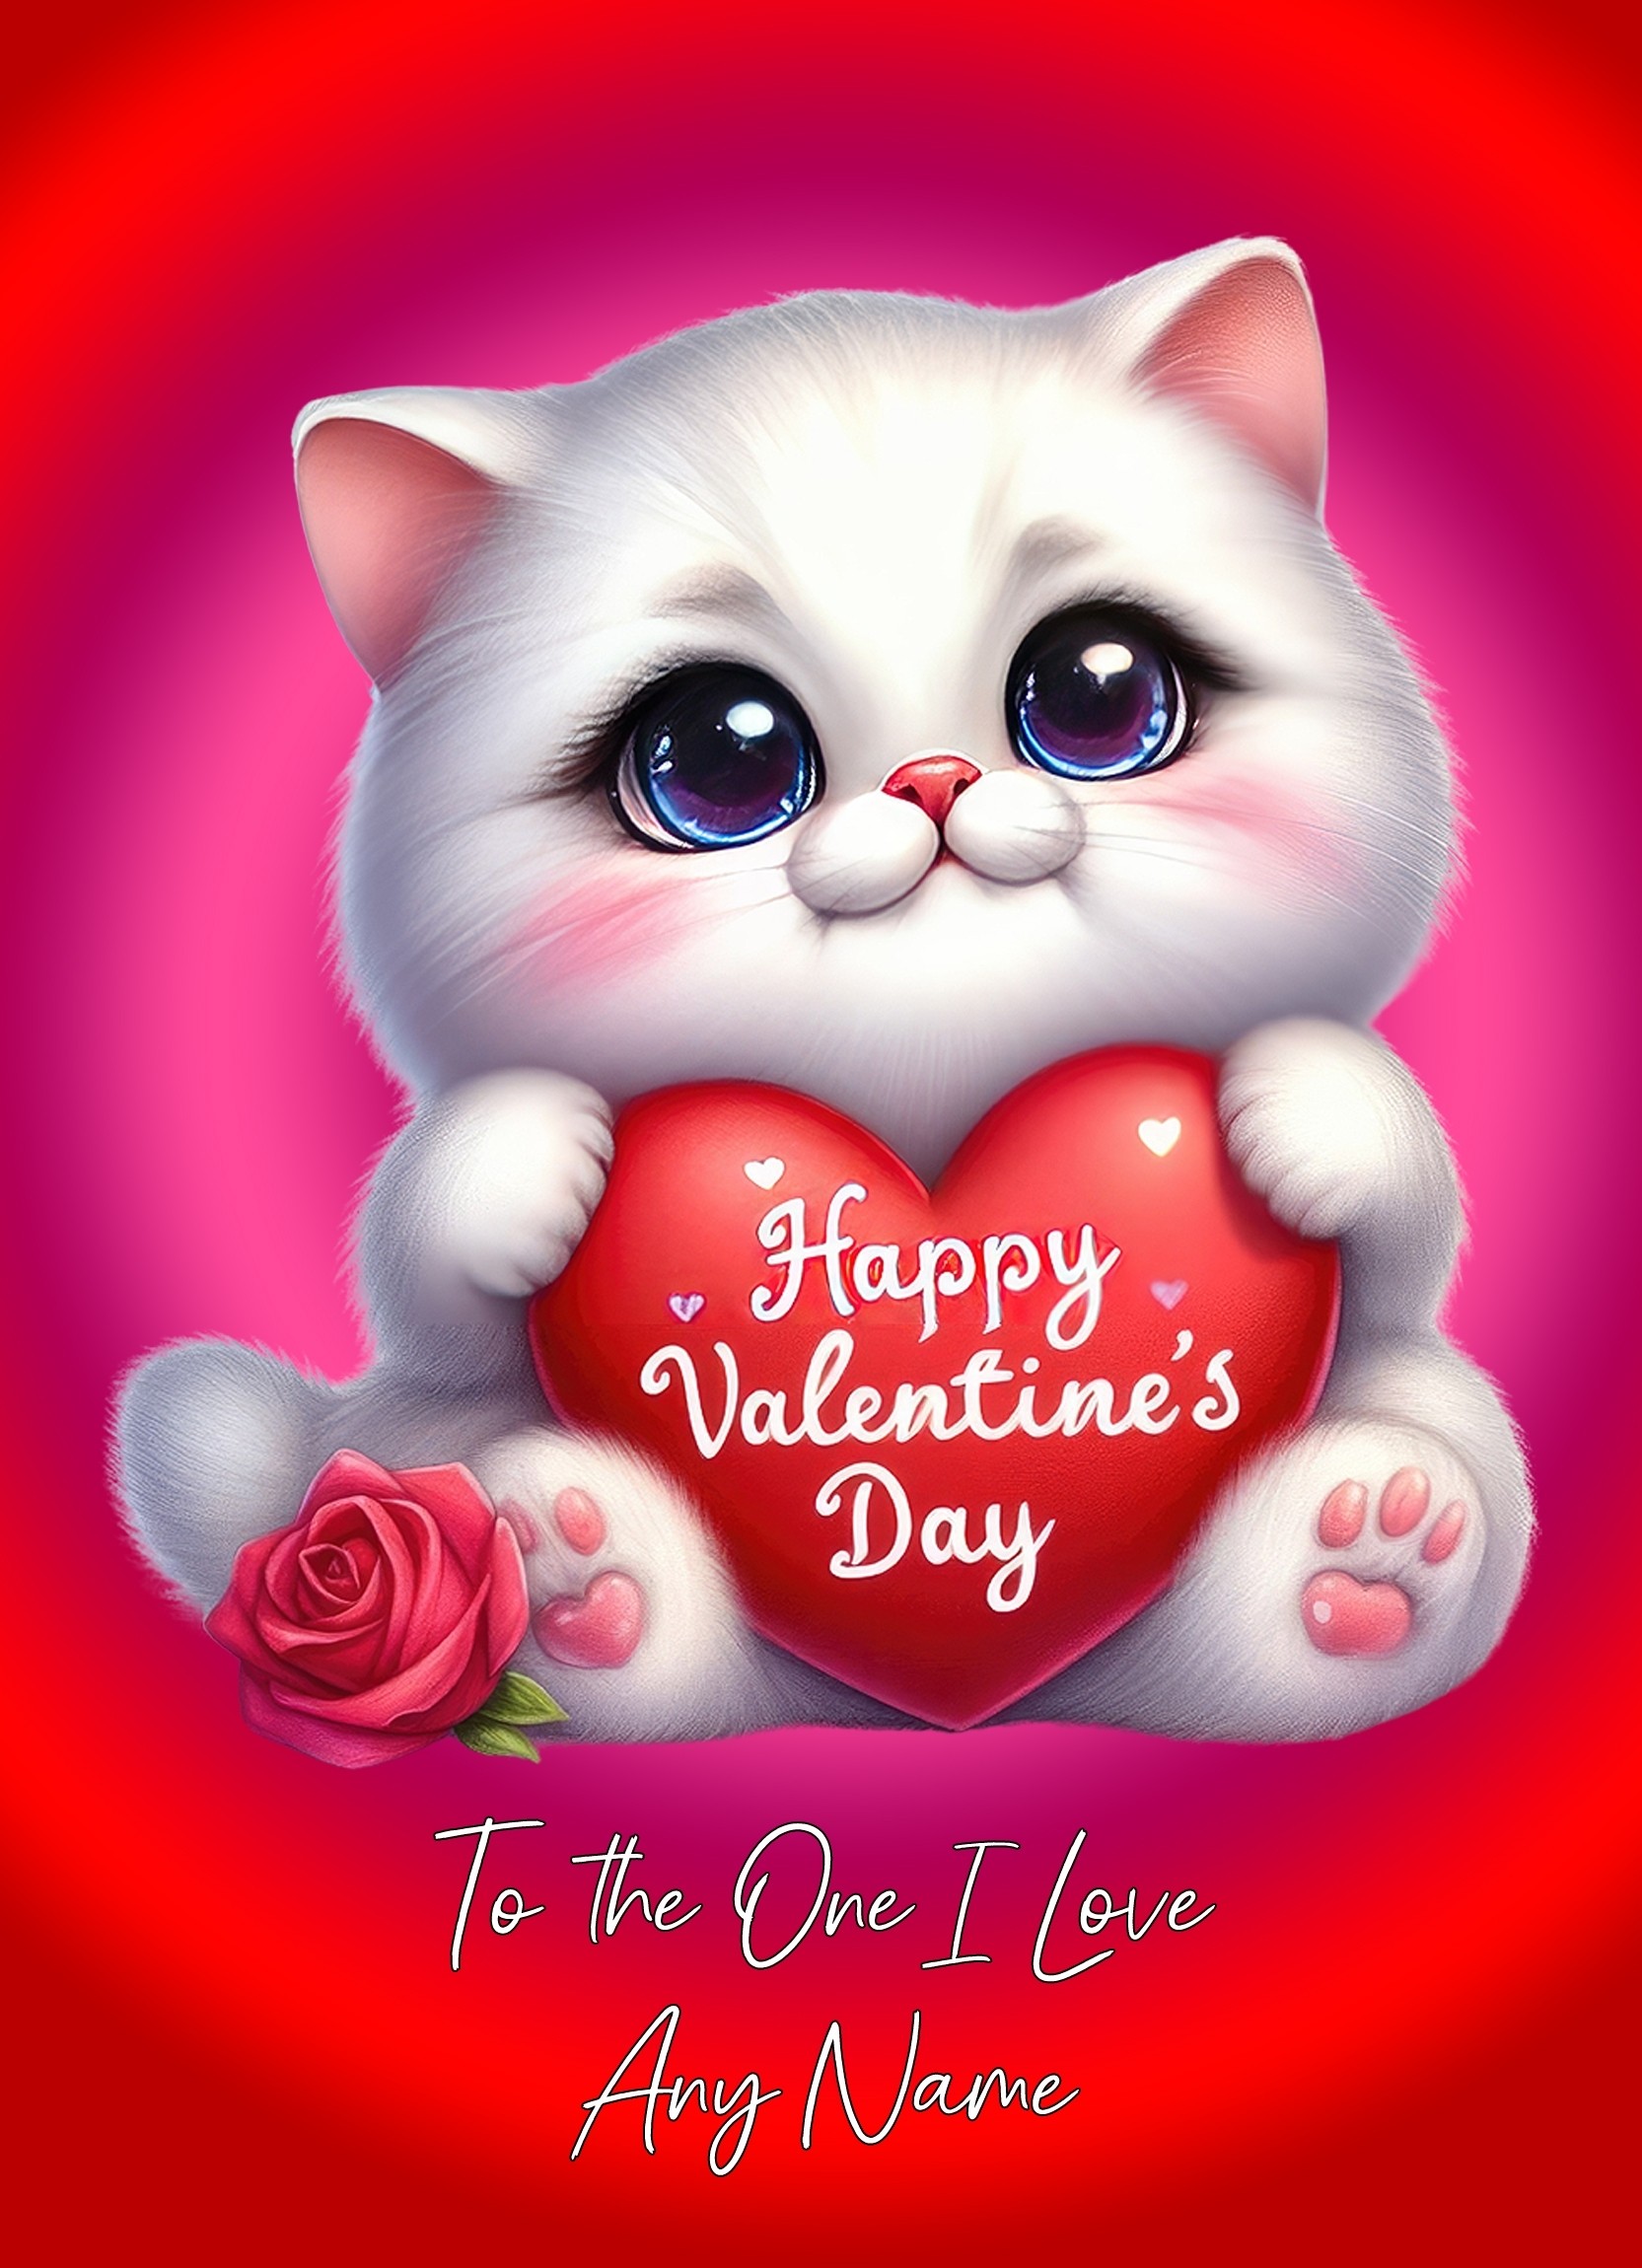 Personalised Valentines Day Card for One I Love (Cat Kitten)